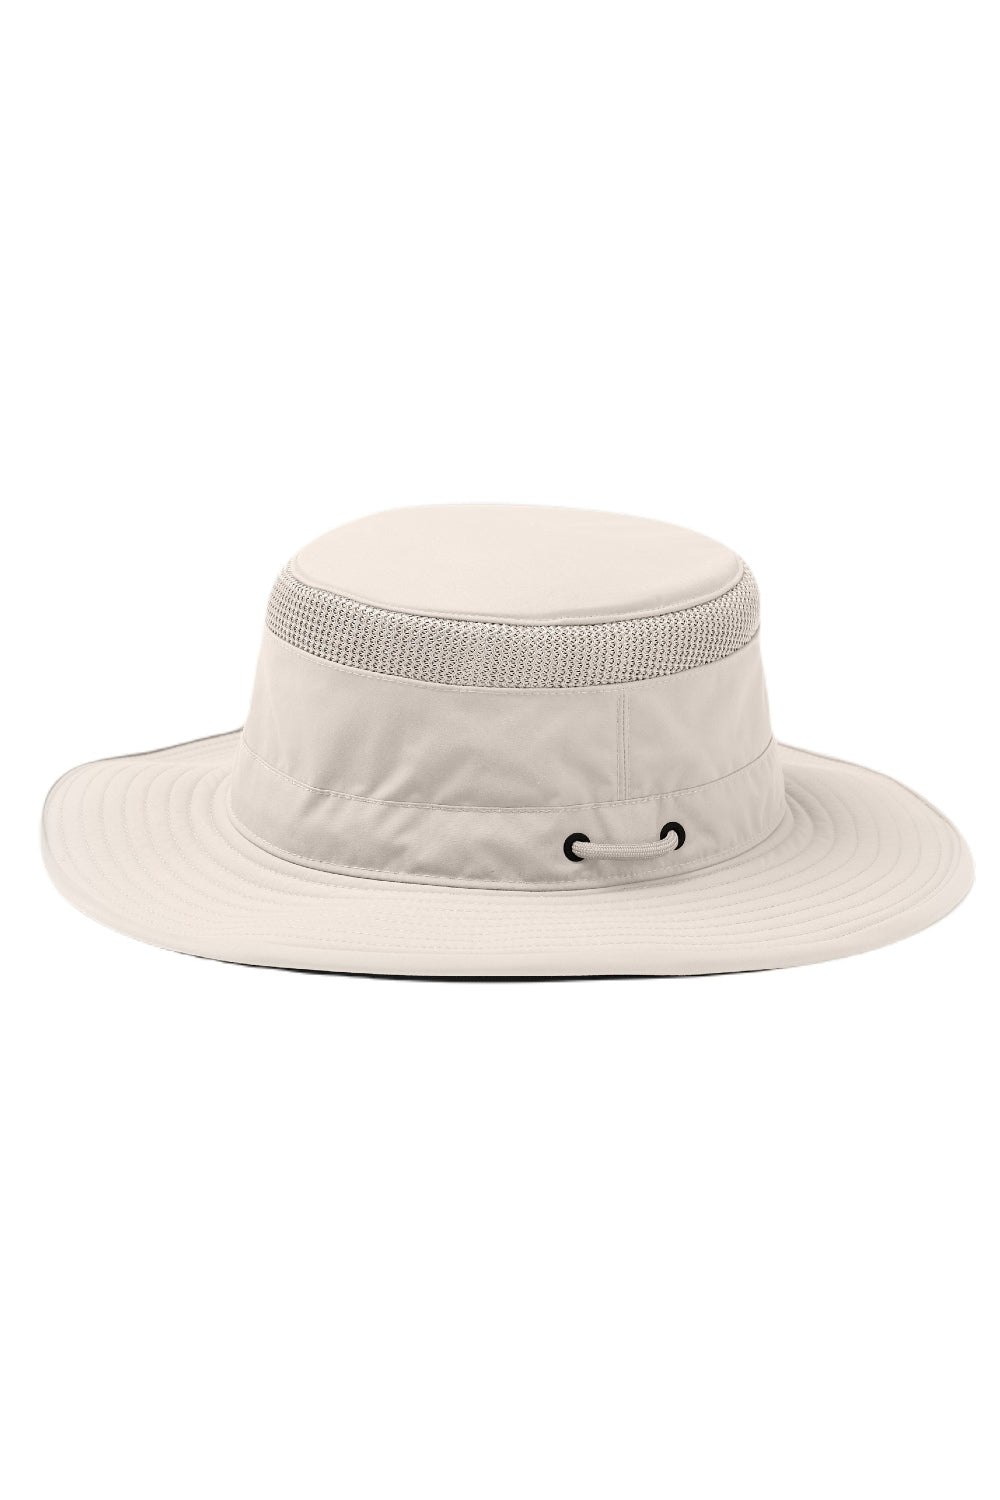 Tilley Hats Airflo Boonie In Stone 